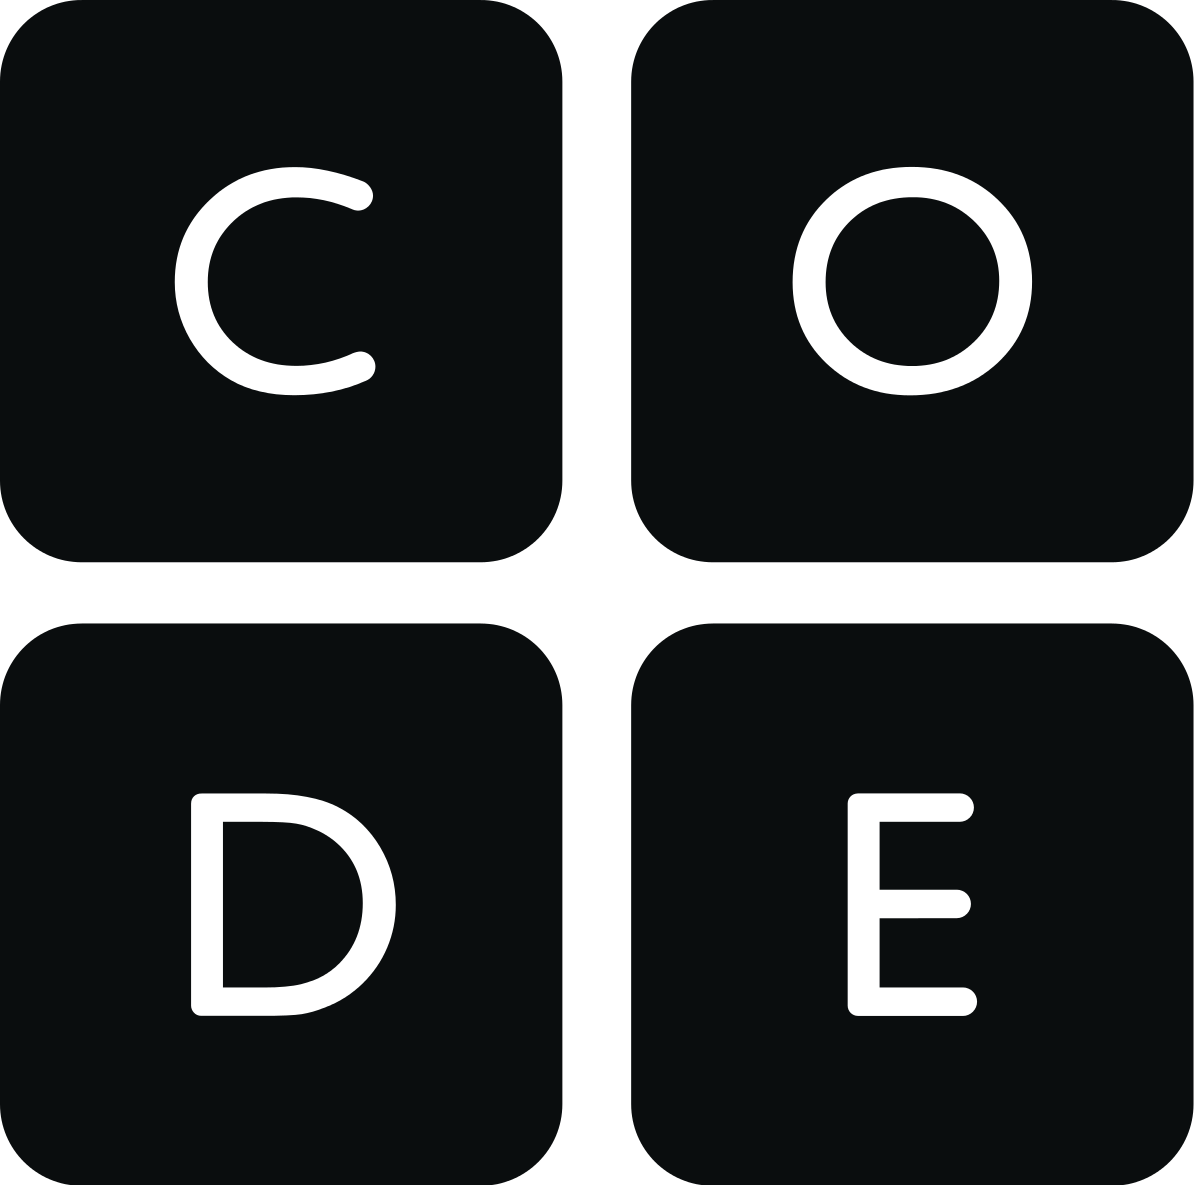 Code.org Administrator Resources